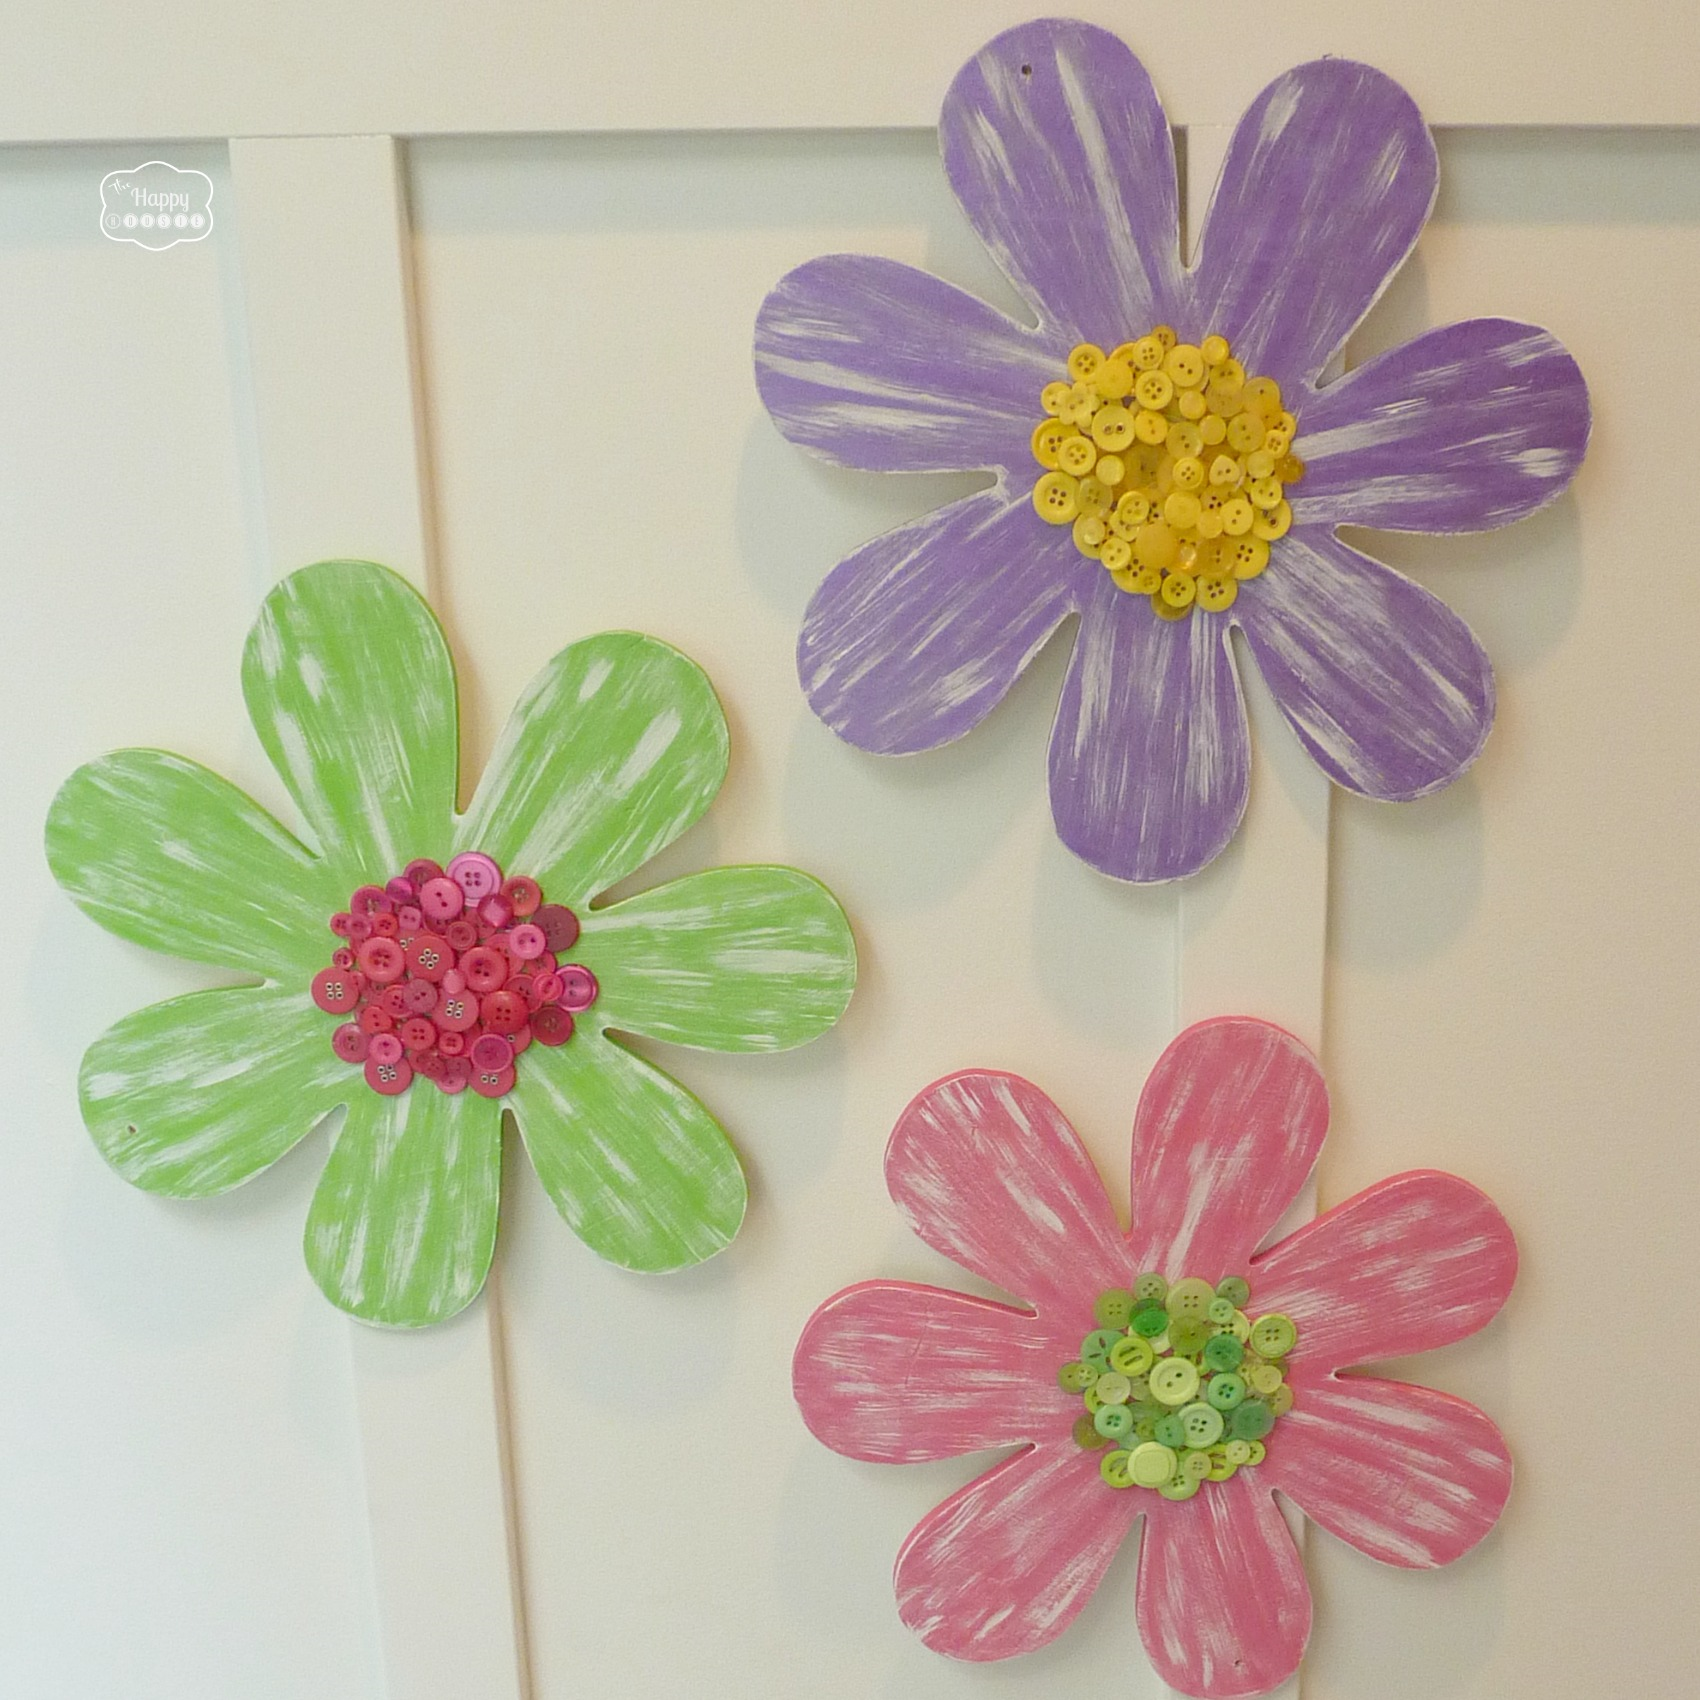 Painted Wood Flowers With Button Centers The Happy Housie